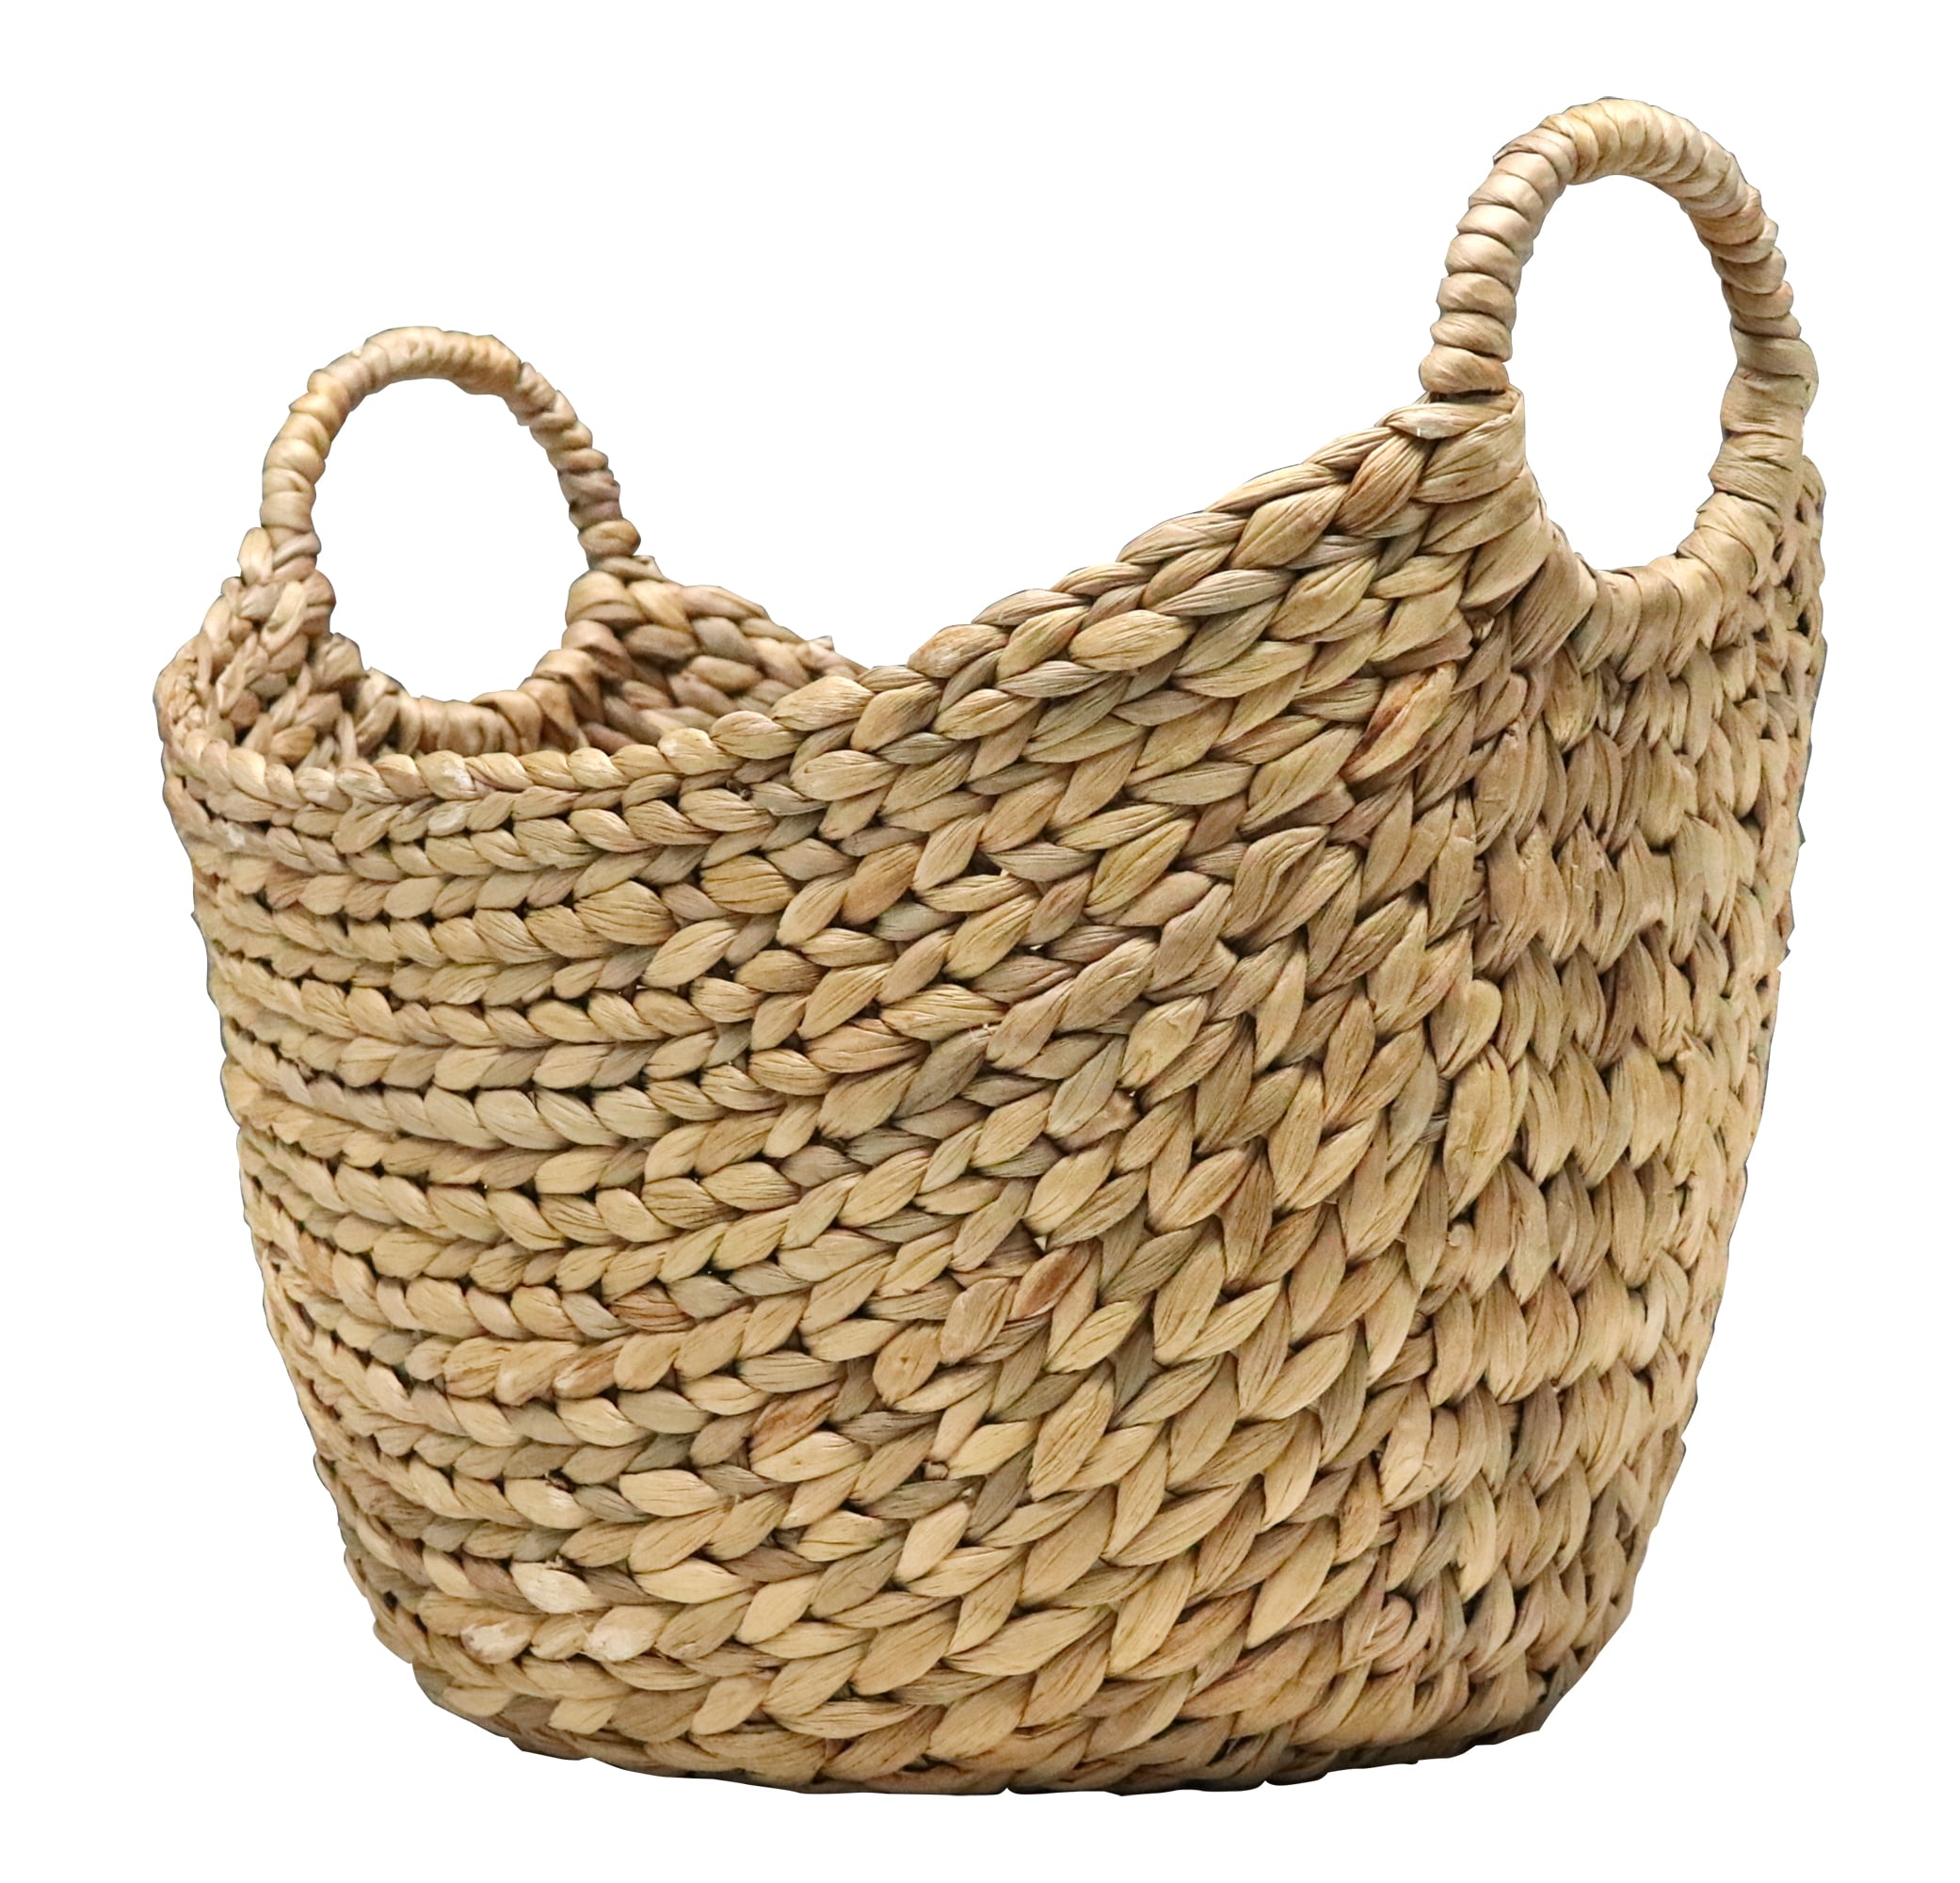 CleverMade 3PK Collapsible Shopping Basket - TAN